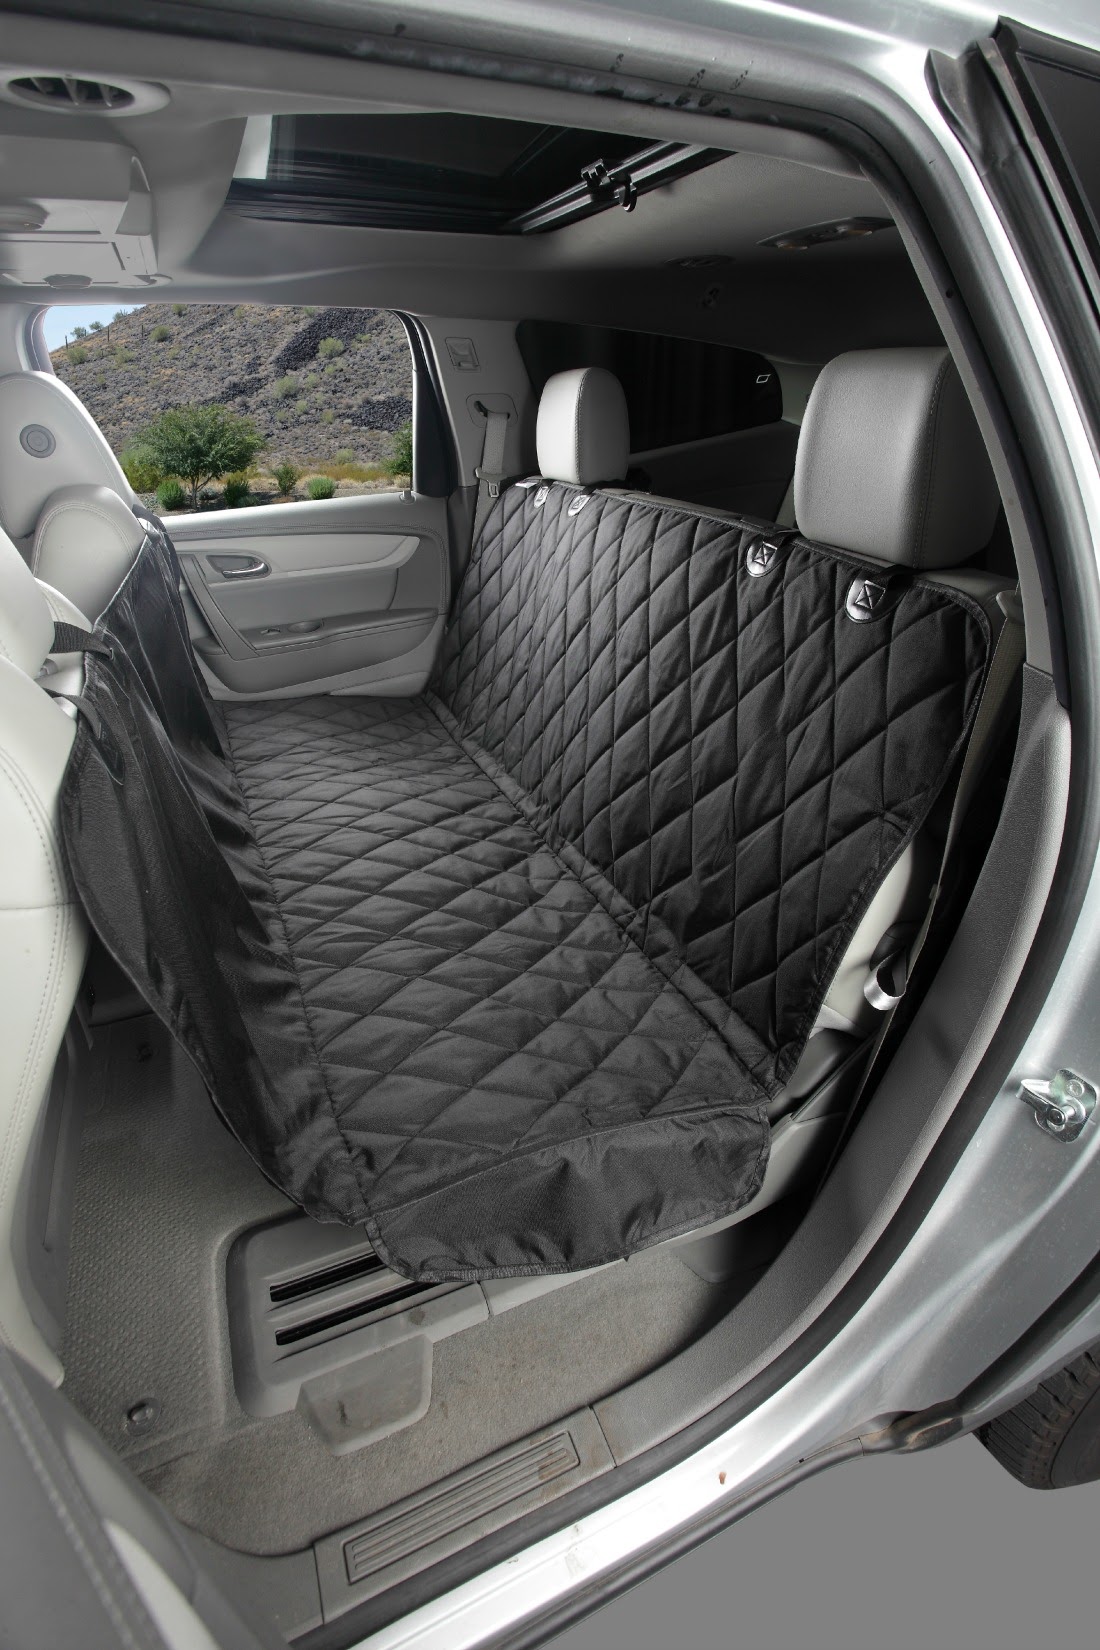 4Knines Dog Seat Cover with Hammock for Cars, Trucks and SUVs New  Waterproof Seat Bottom (Regular, Black)